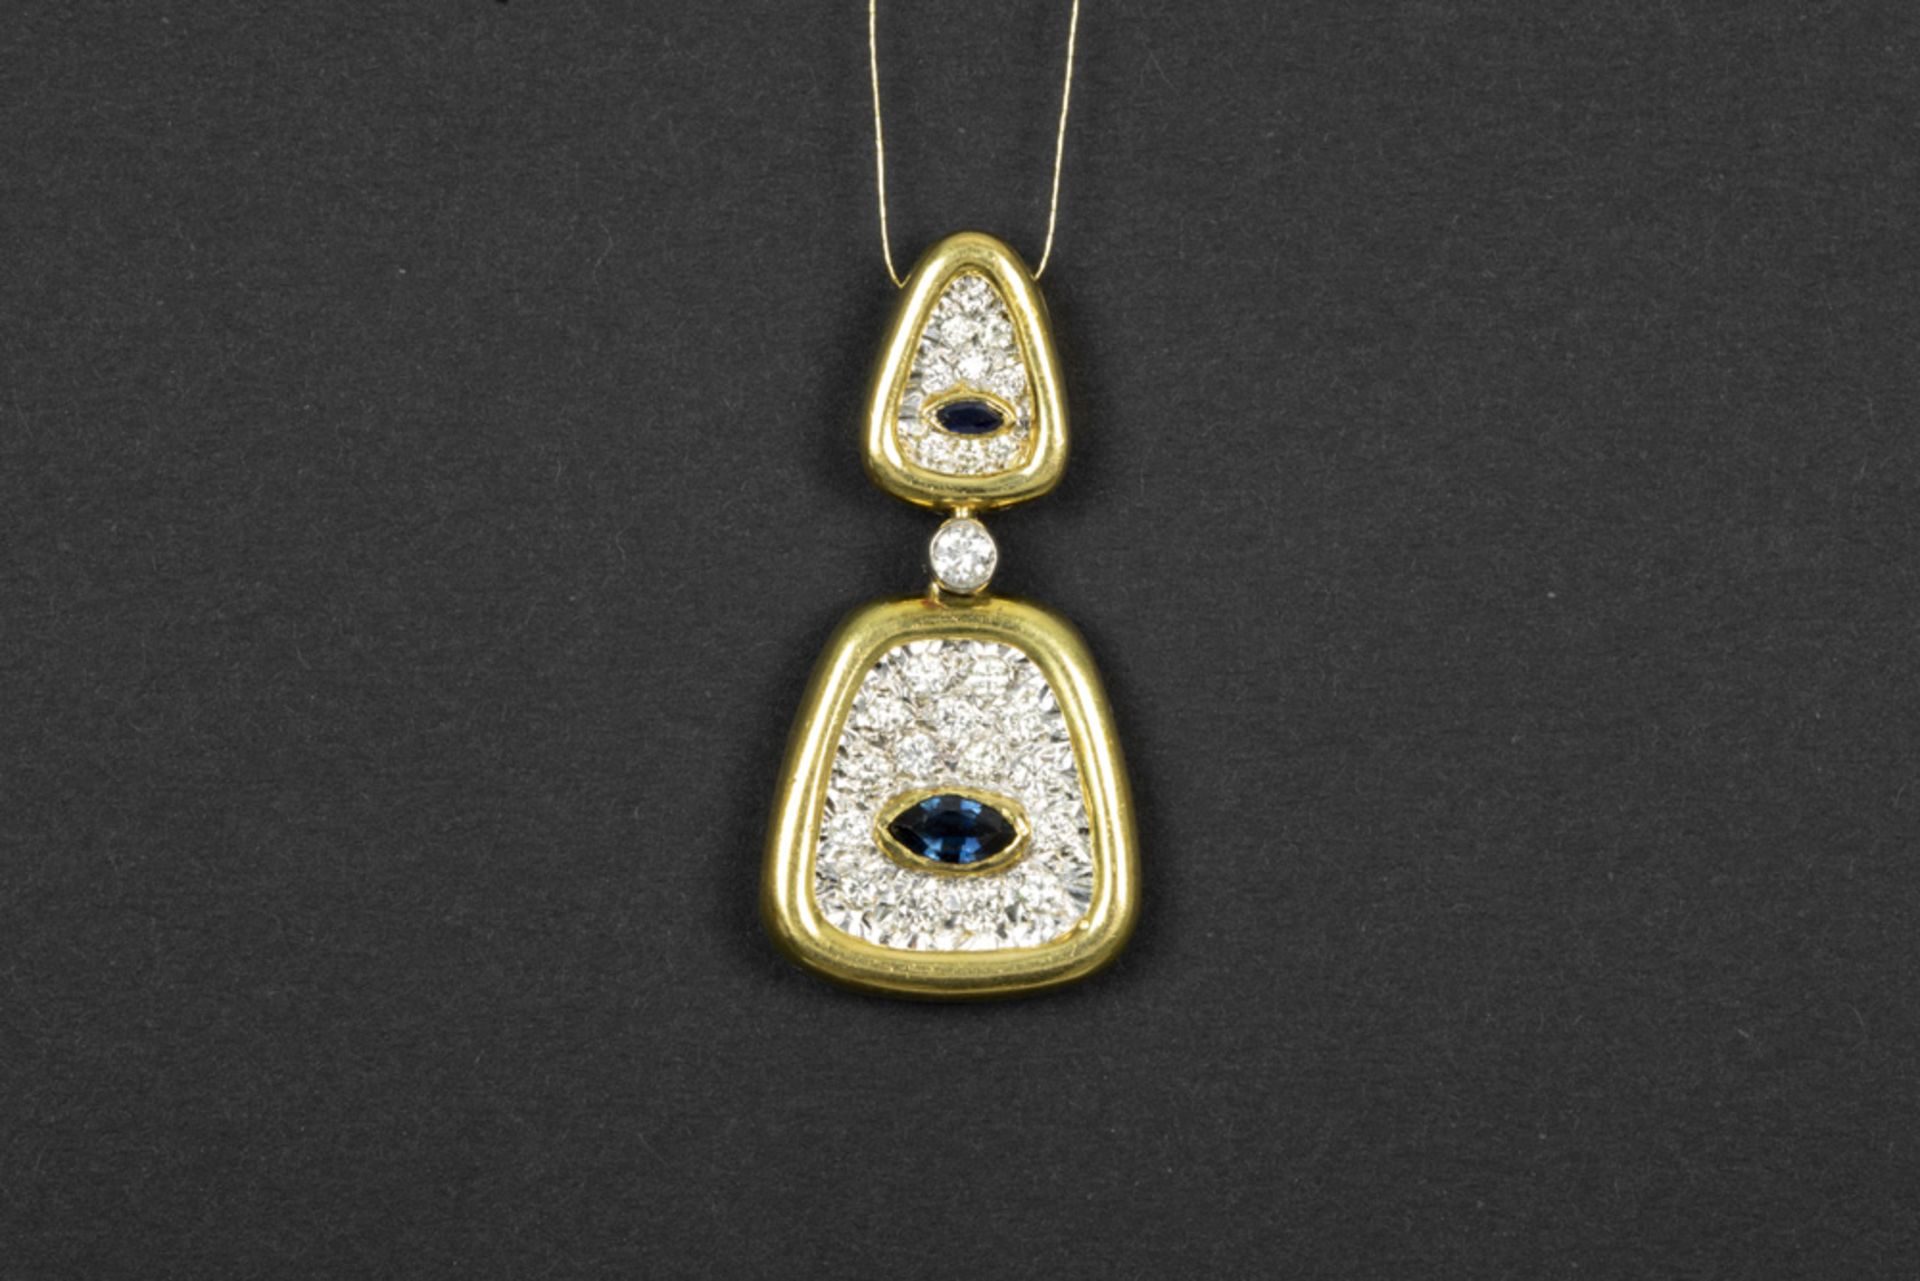 seventies' vintage pendant in yellow and white gold (18 carat) with ca 1 carat of very high